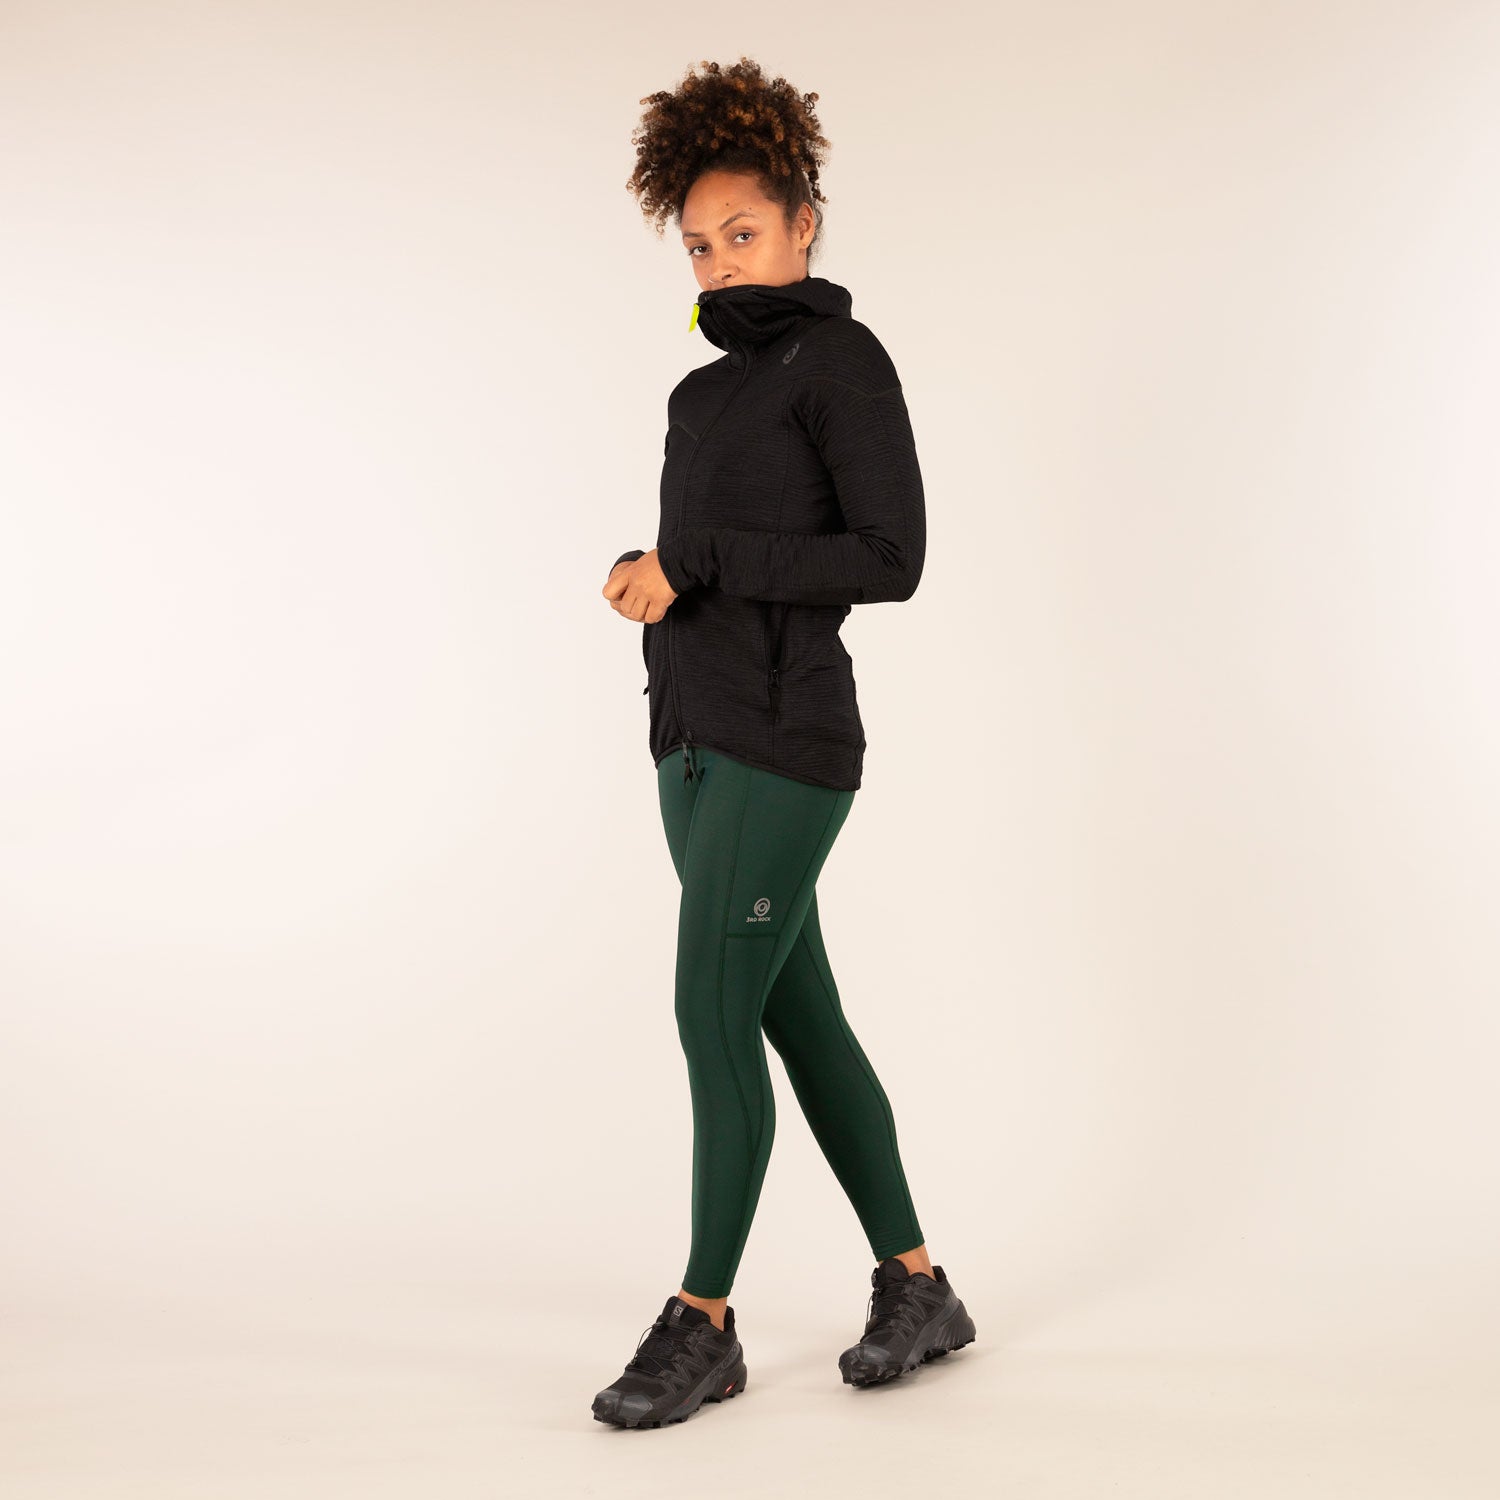 DAPHNE Leggings | Women's Thermal Daphne Leggings | 3RD ROCK Clothing - Kendal is 5ft 7 with a 28" waist, 38" hips and wears a size 12/RL. F